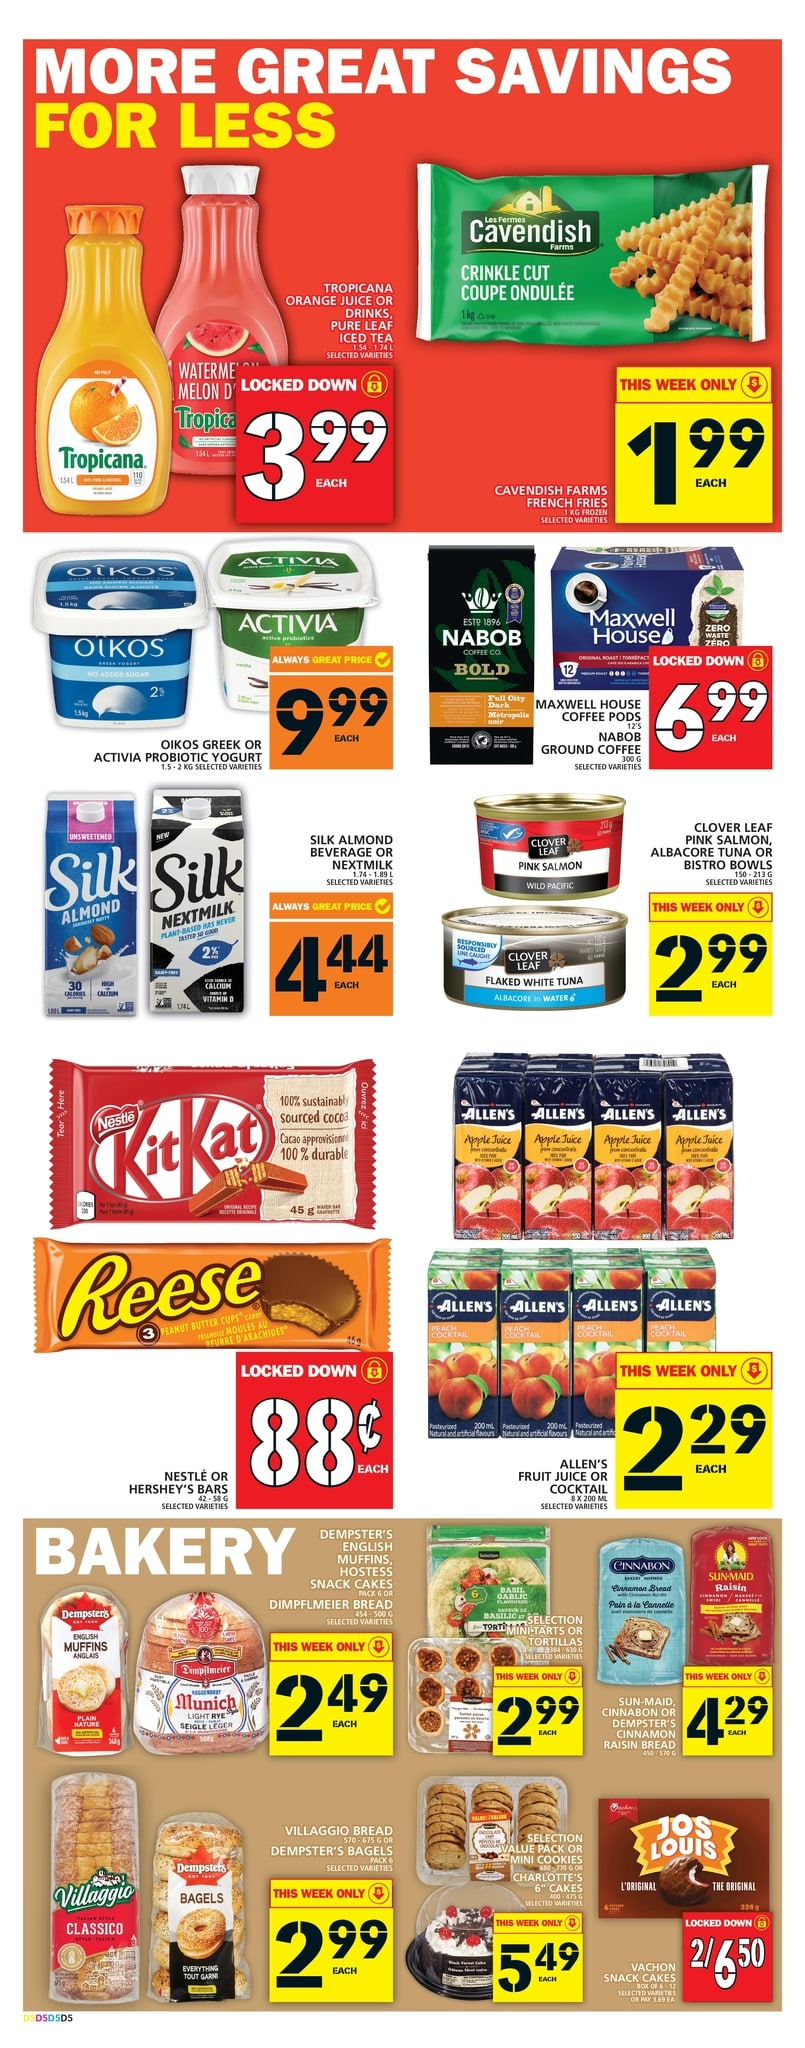 Food Basics - Weekly Flyer Specials - Page 6